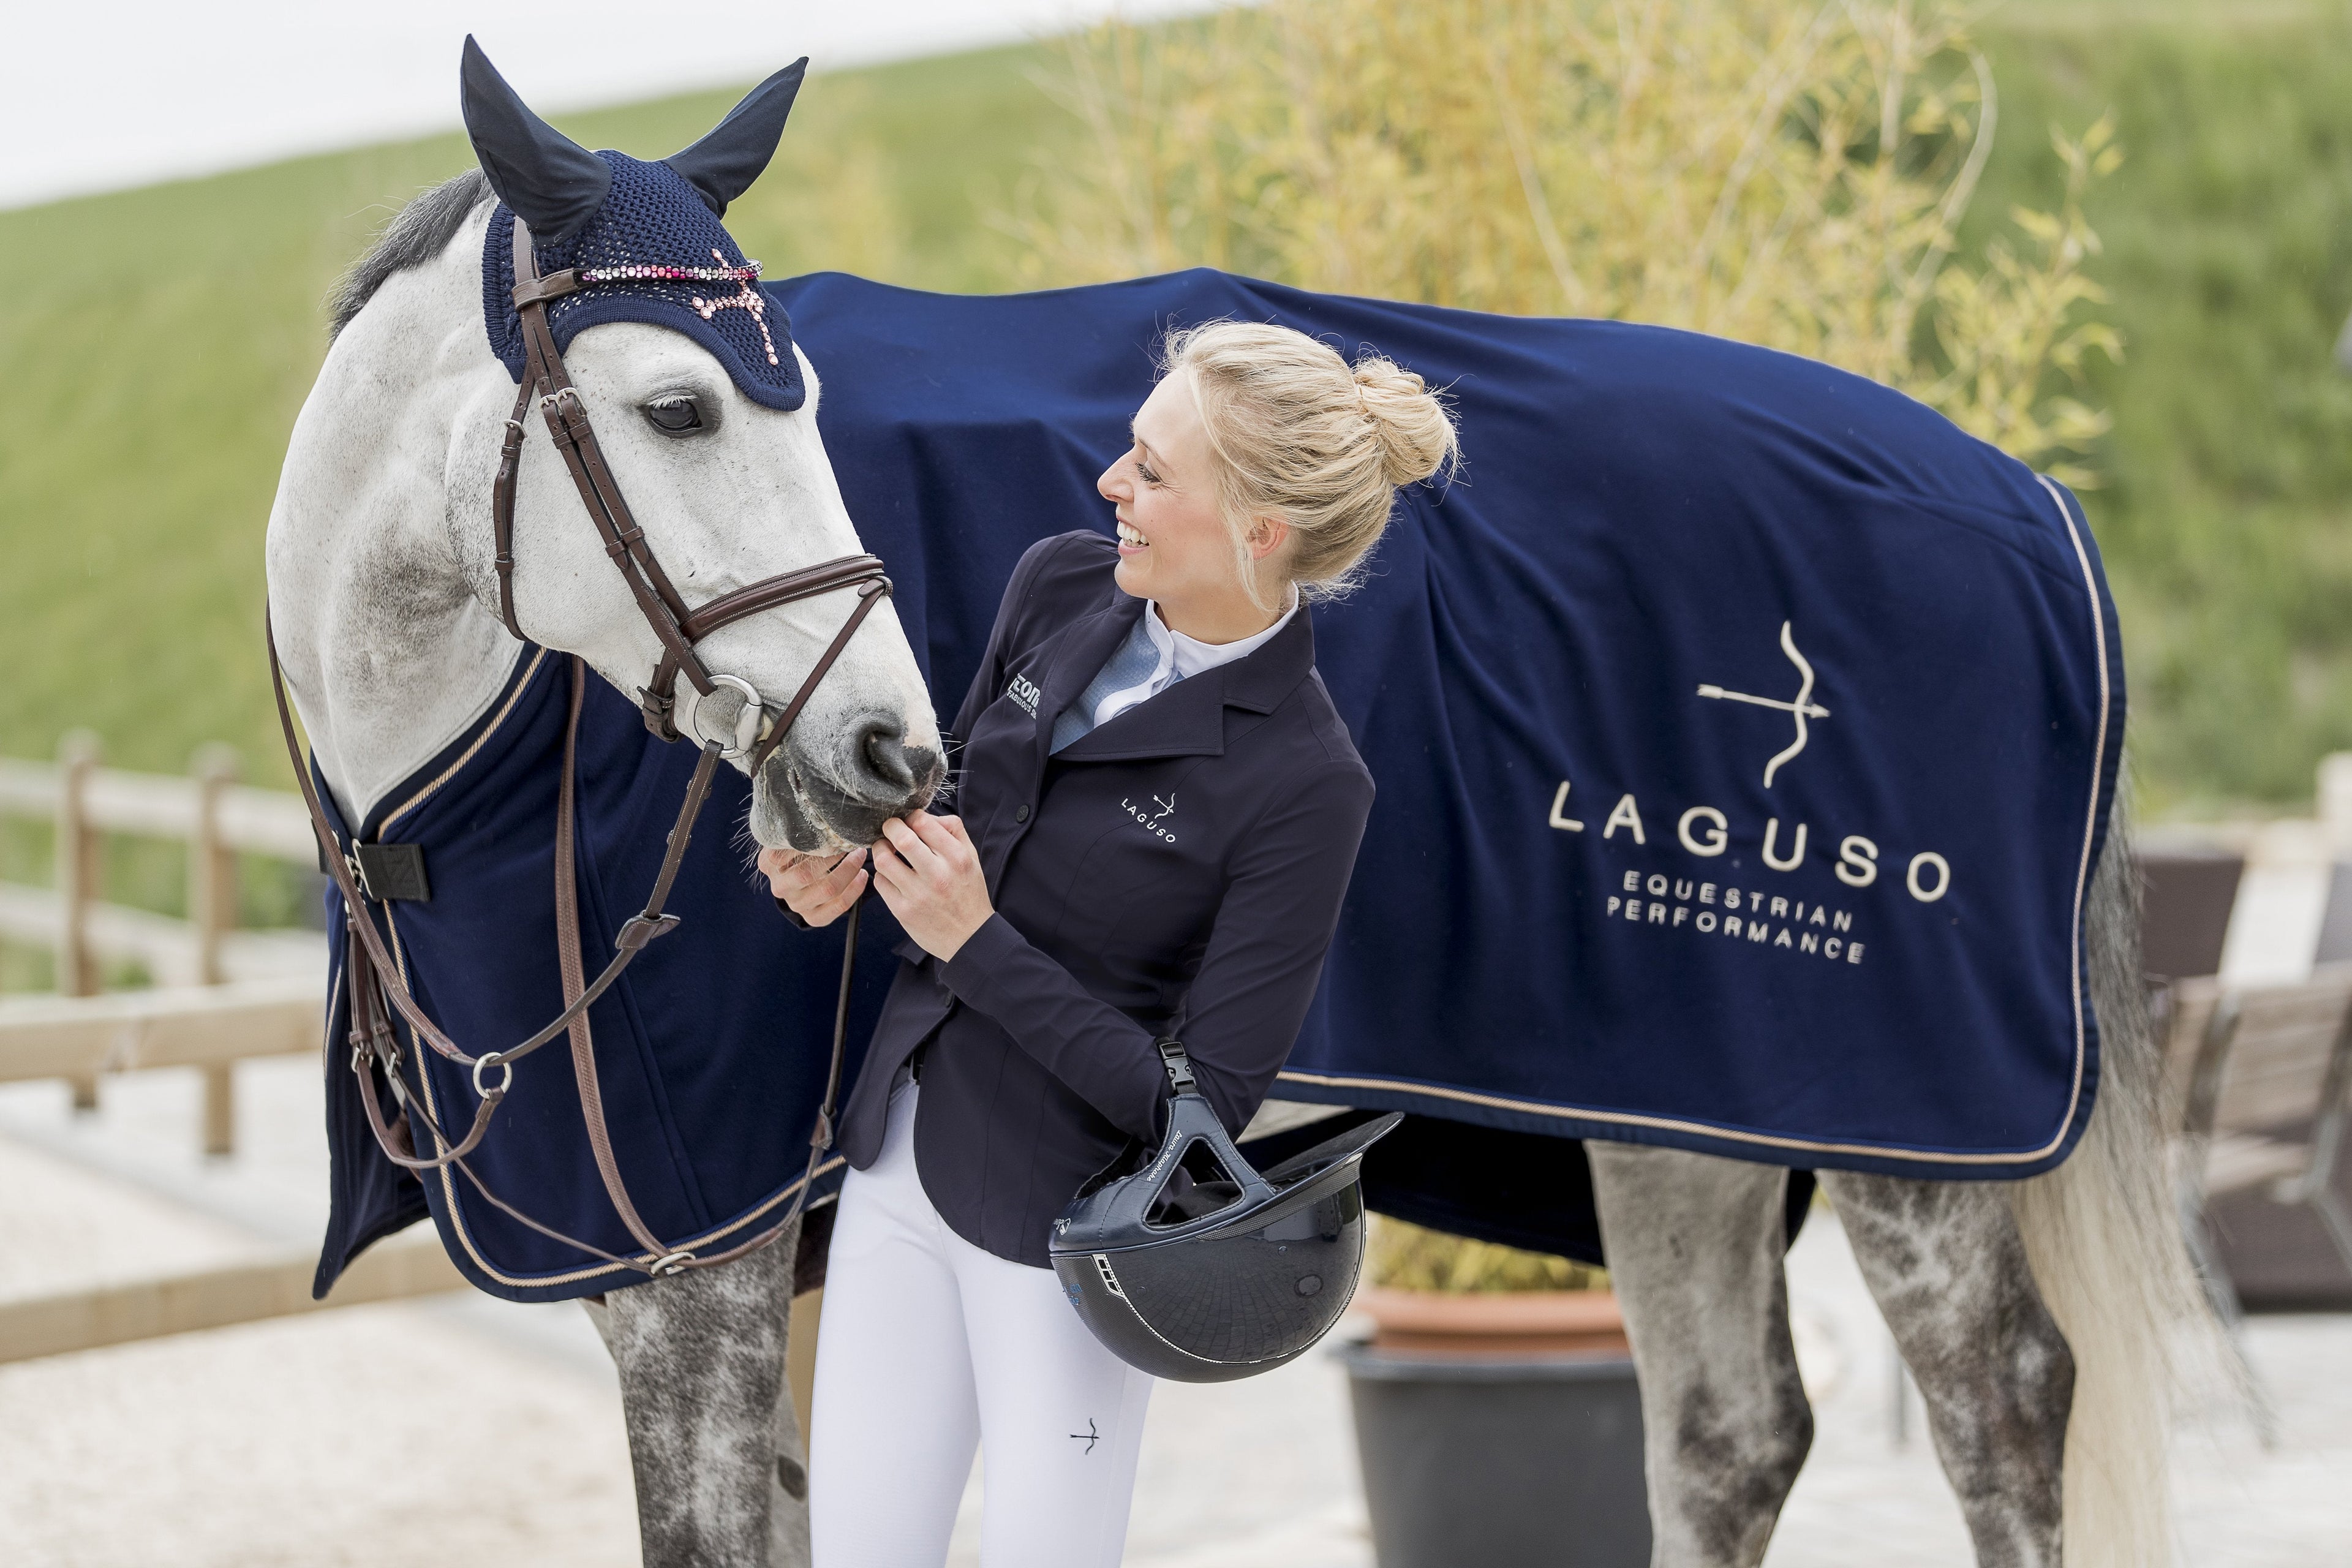 Laguso mens and womens equestrian clothing for competition and training